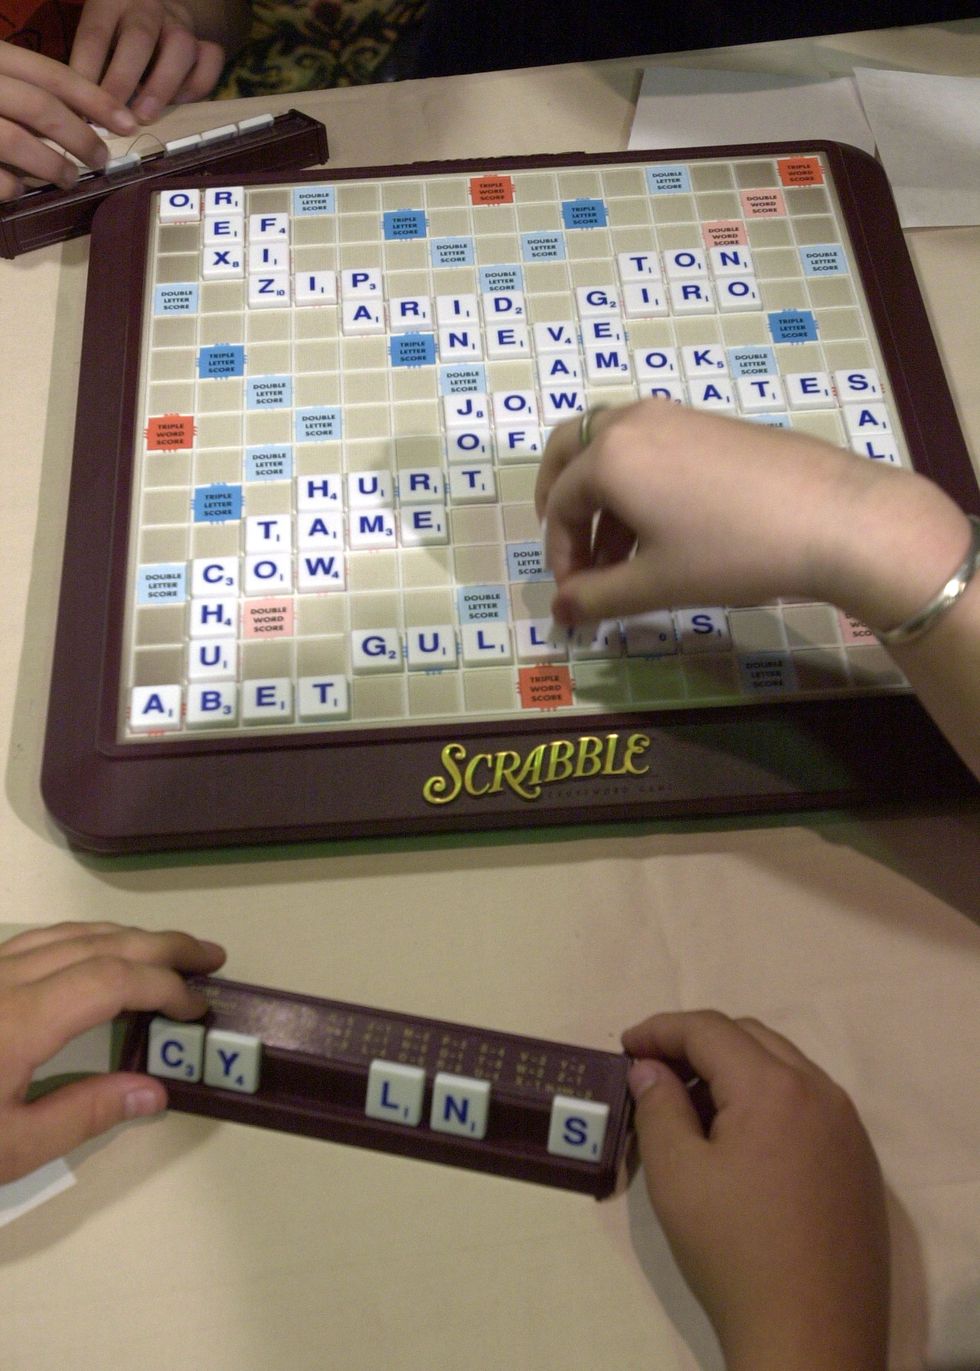 How to Play Scrabble: Word Game Rules (Plus Easy Tricks!)